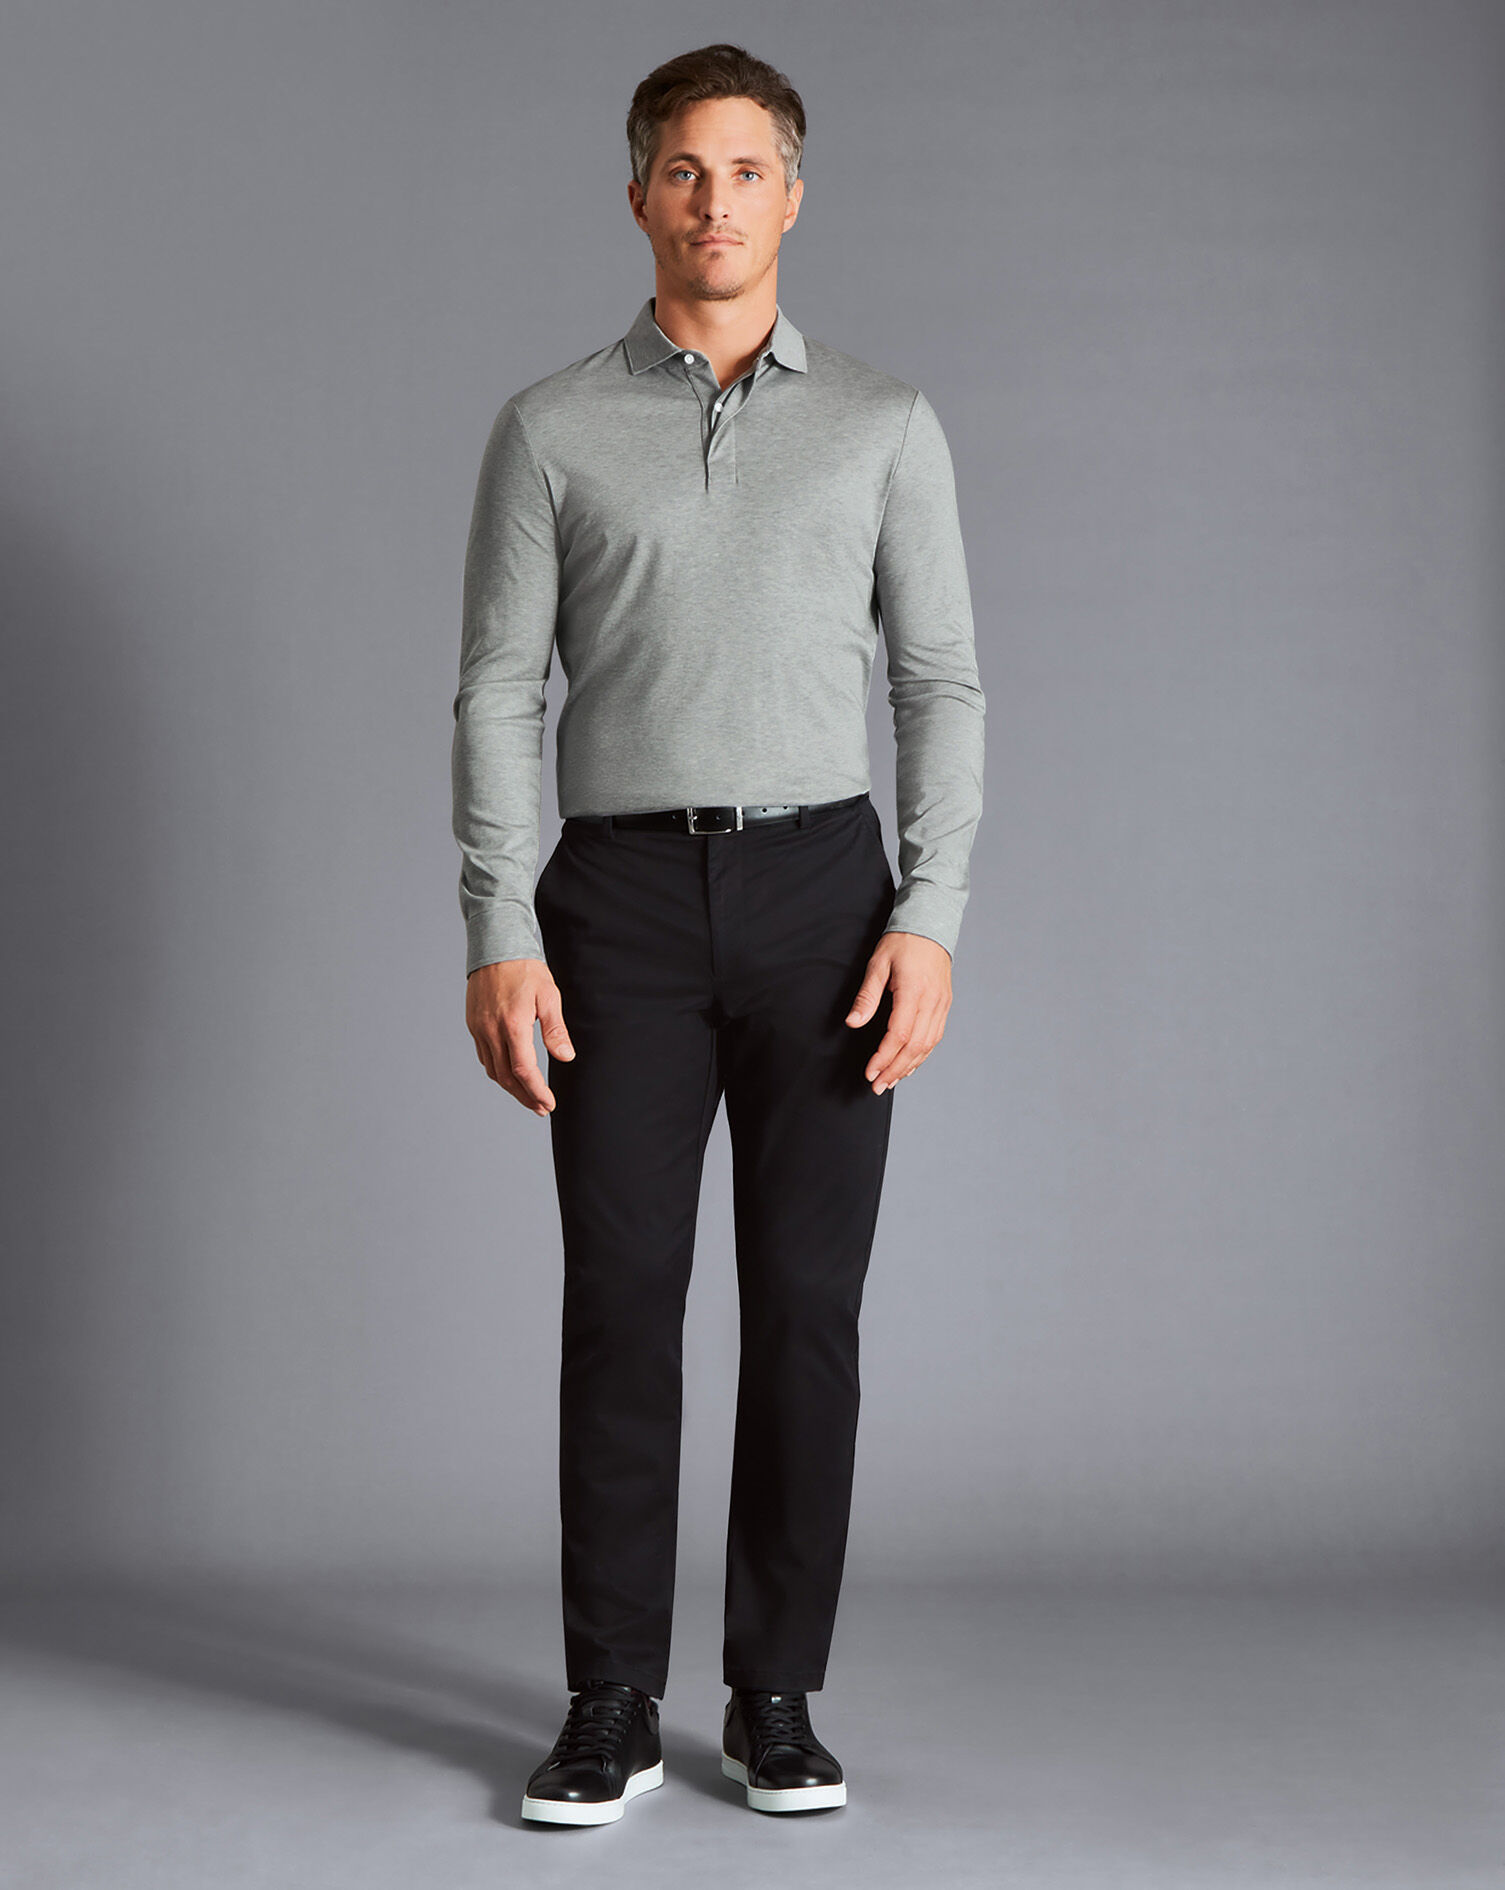 Can I wear tan shoes with a grey shirt and black pants? - Quora